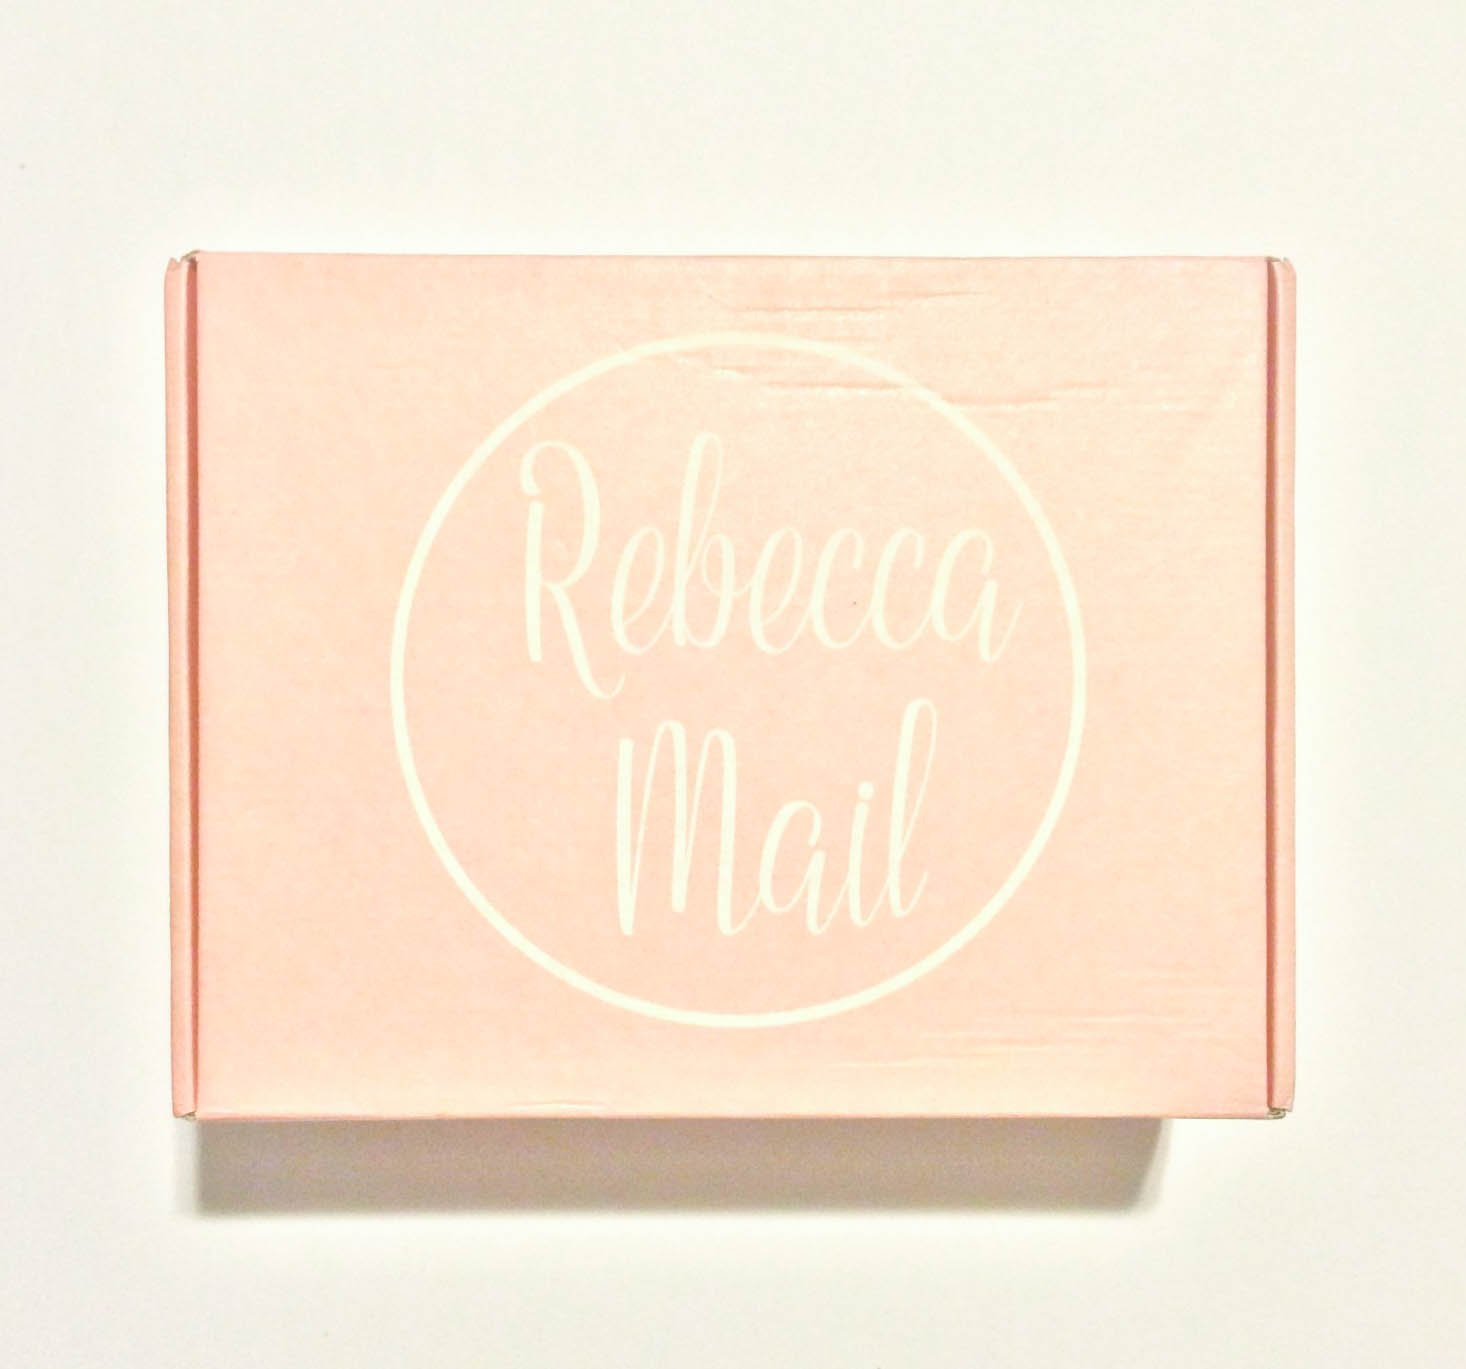 RebeccaMail Deluxe Lifestyle Box Review + Coupon- September 2016